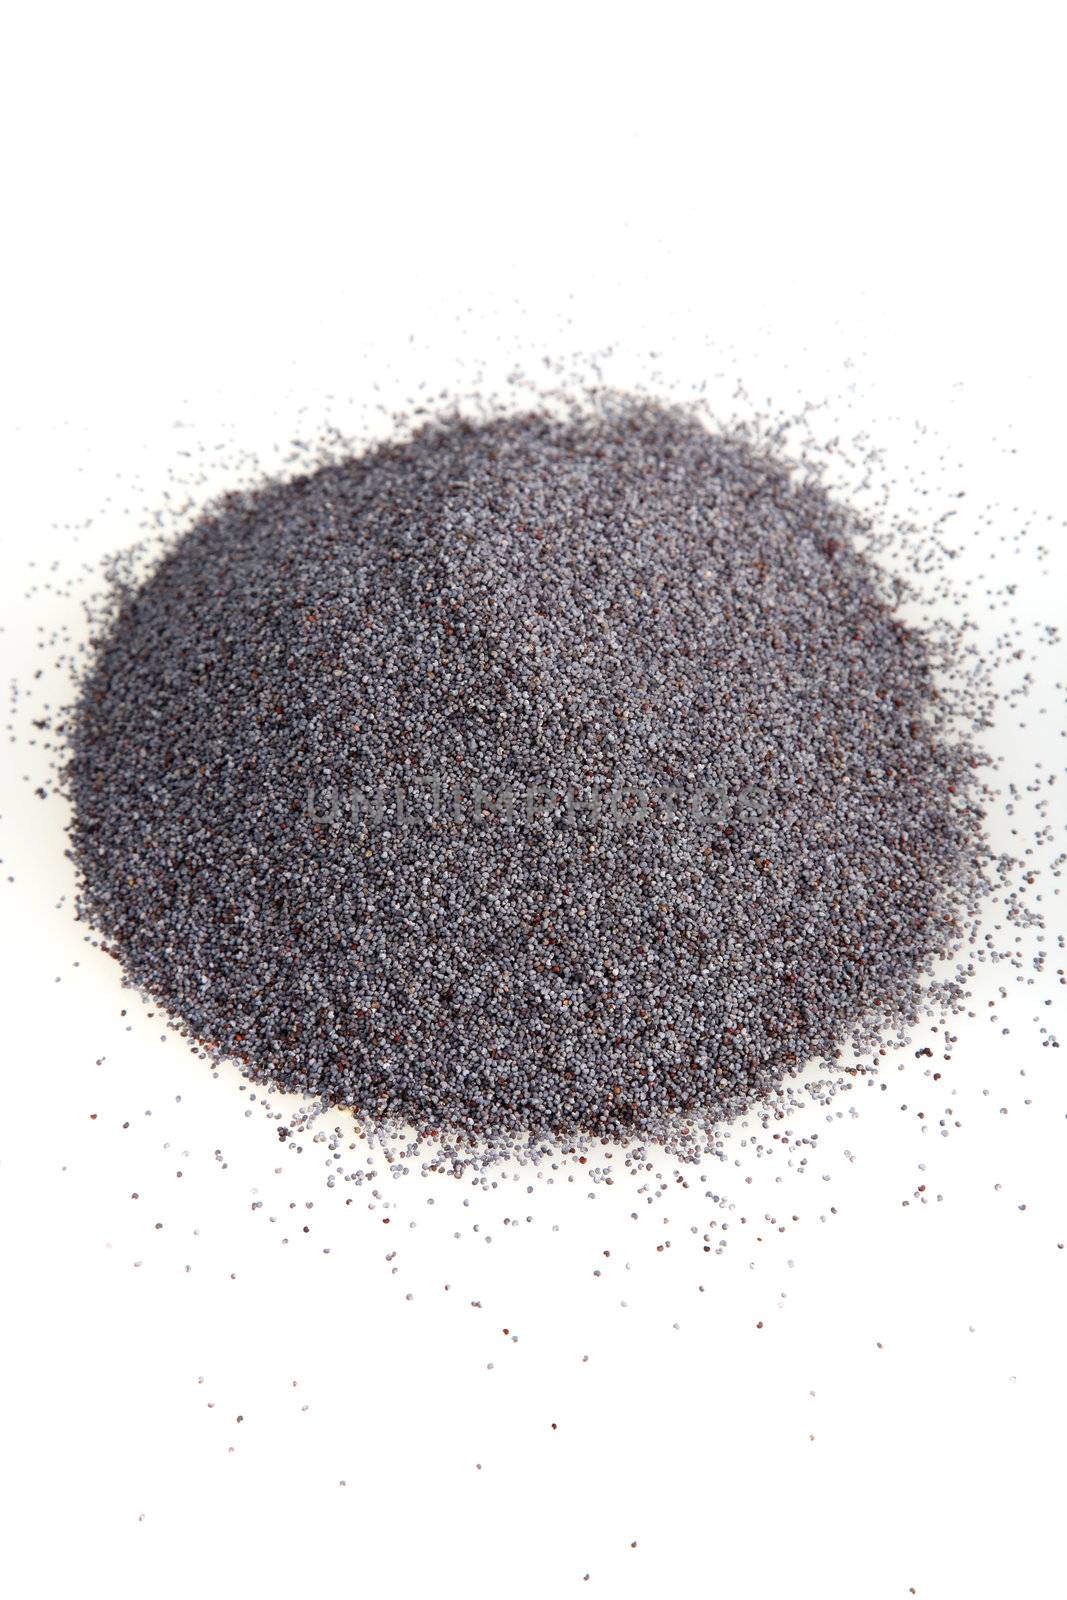 A studio shot of a pile of tiny poppy seeds against a white background